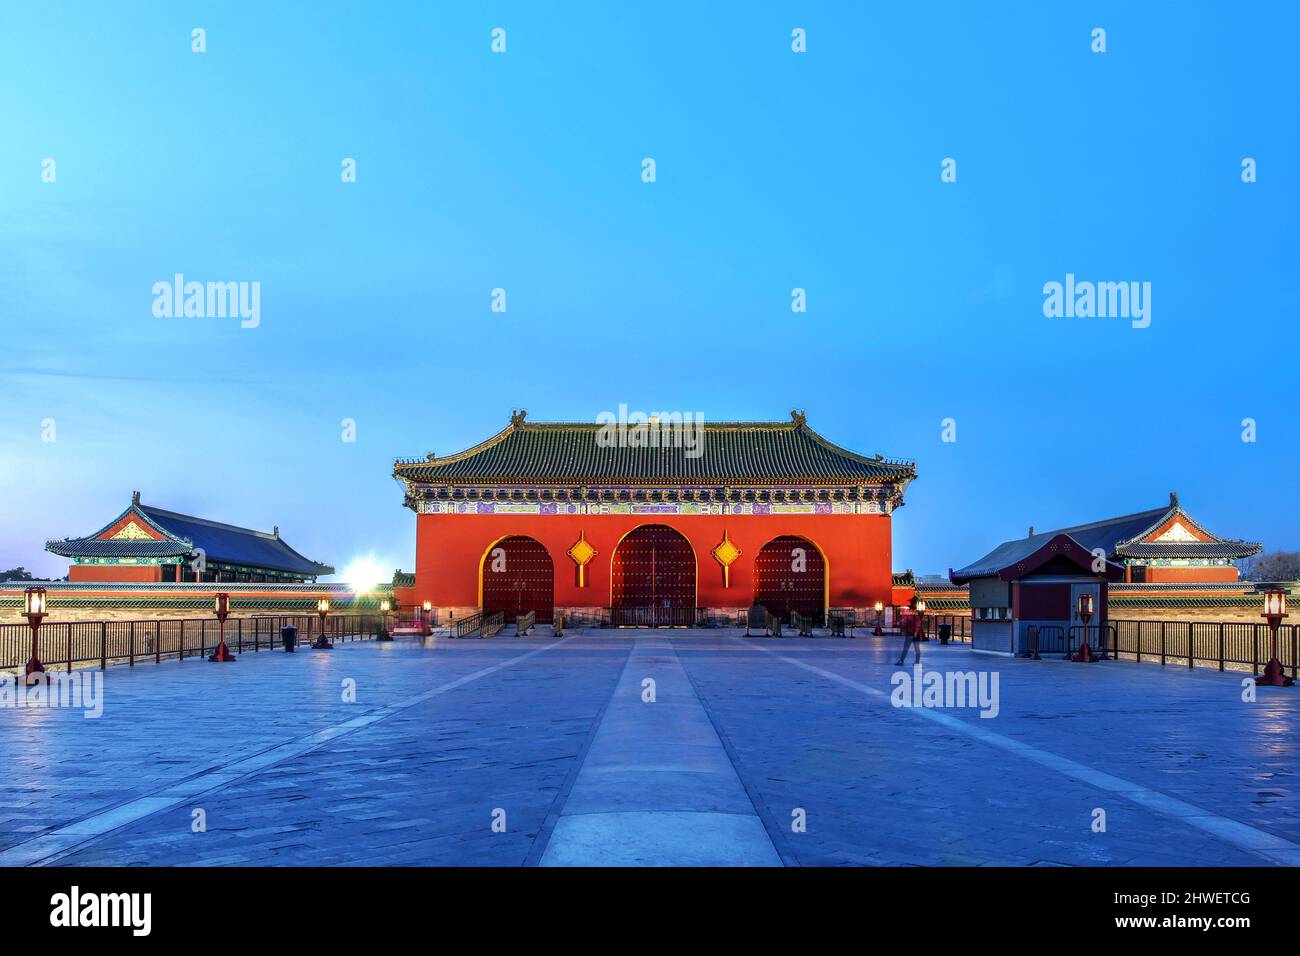 Night composition of the entrance Gate to The Temple of Heaven in Beijing, China. The temple dates from 1420, Ming Dinasty. Stock Photo